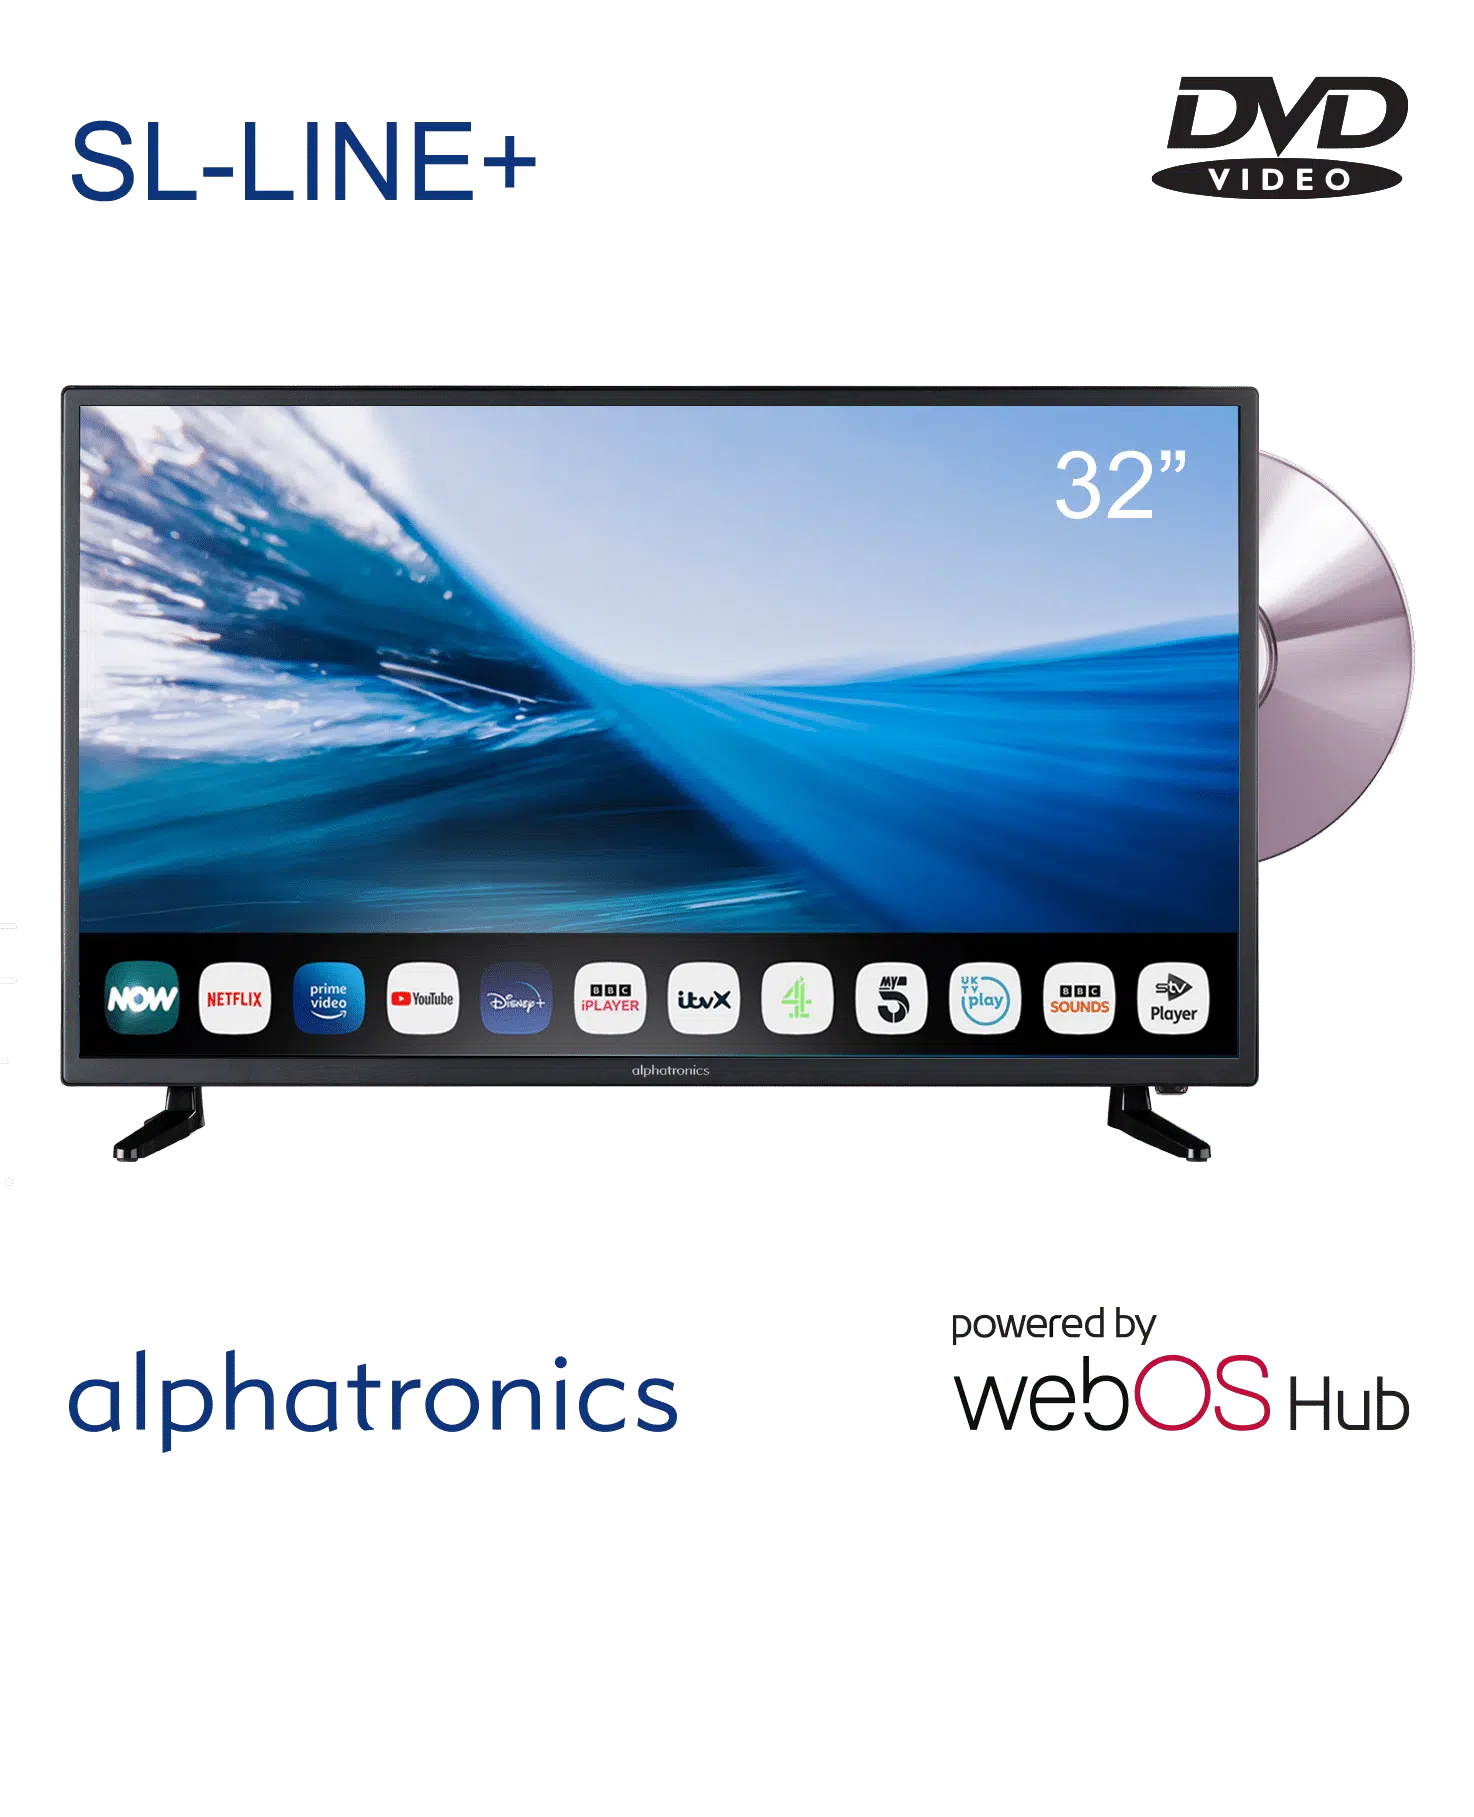 Alphatronics By Maxview SL-Line+ 32" Smart TV With Web OS And DVD